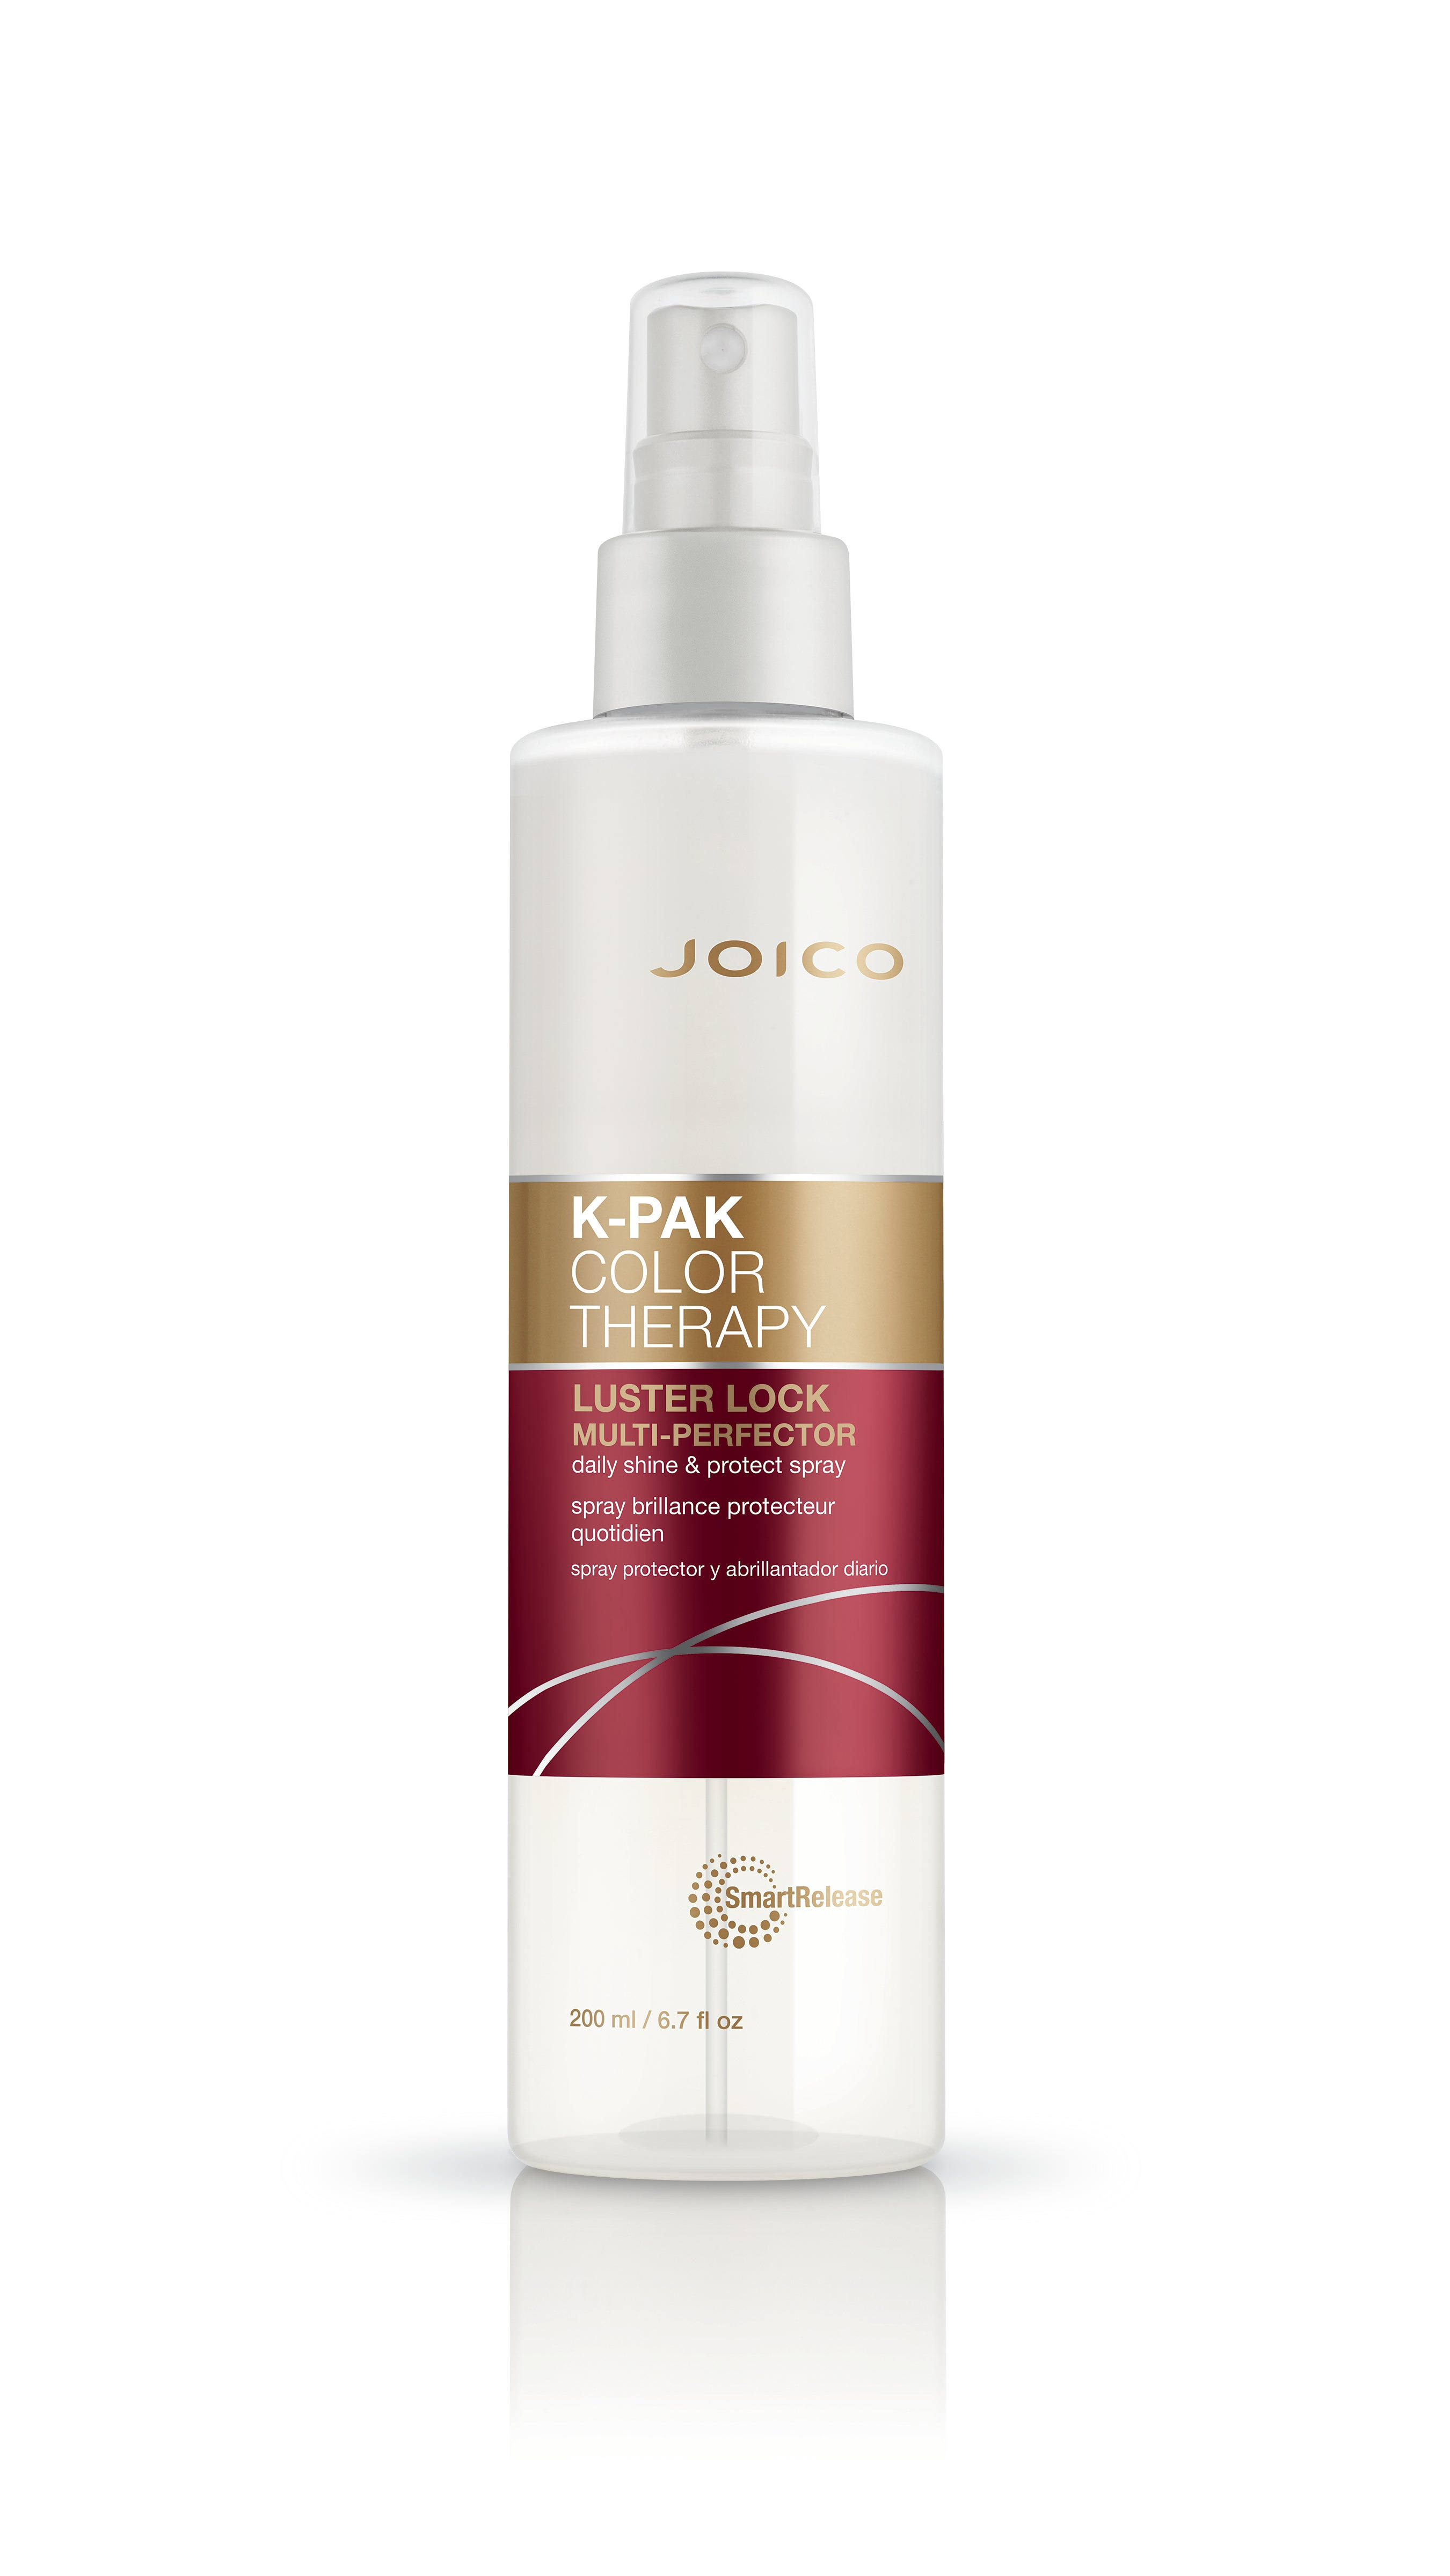 Joico K-PAK Color Therapy Luster Lock Multi-Perfector Spray 200mL